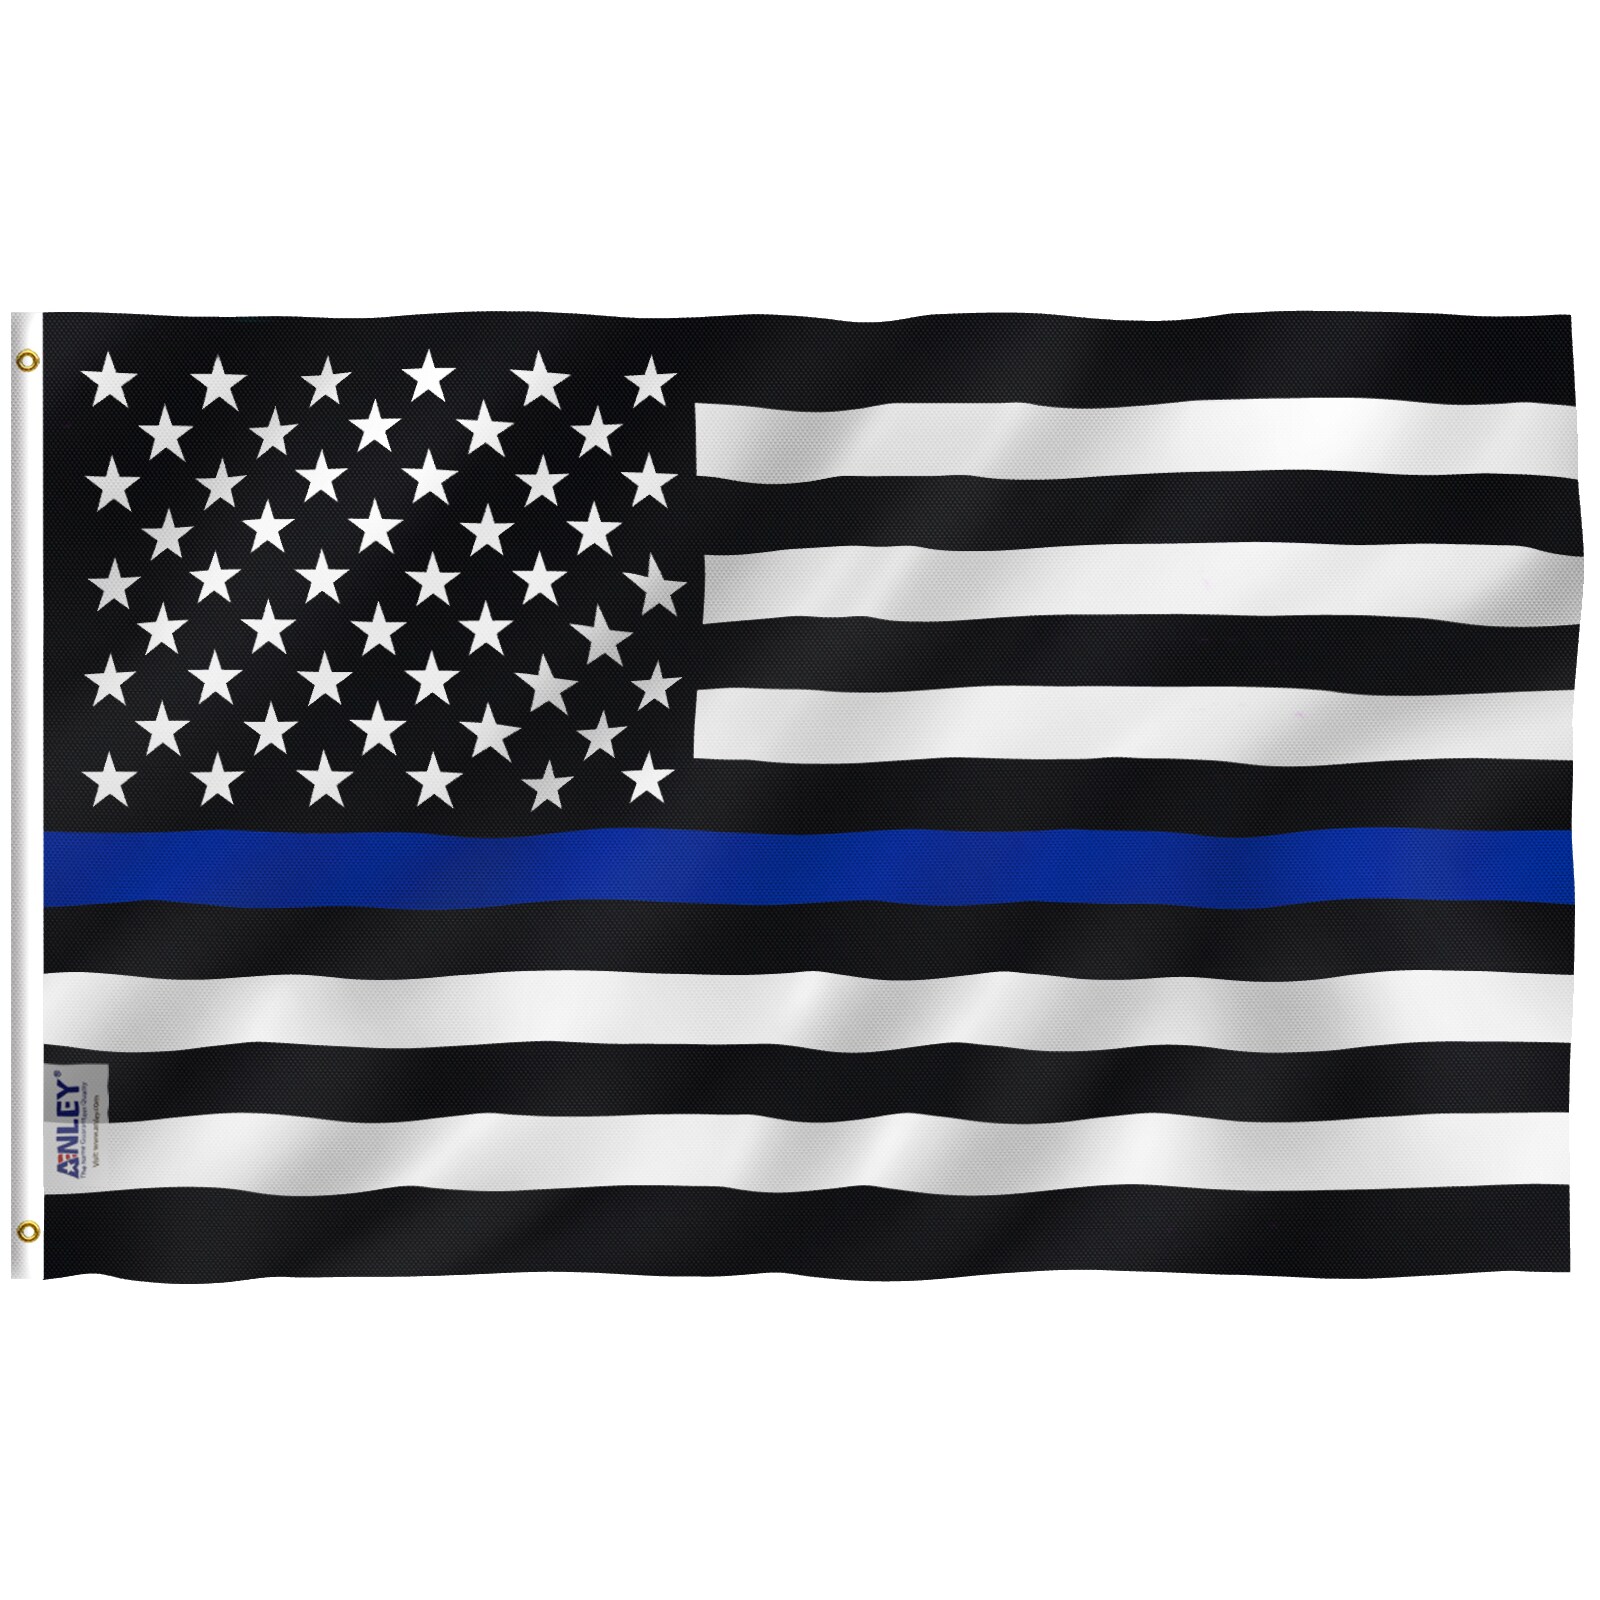 3x5 FT THIN BLUE LINE FLAG POLICE LAW ENFORCEMENT SUPPORT MADE IN THE U.S.A. 